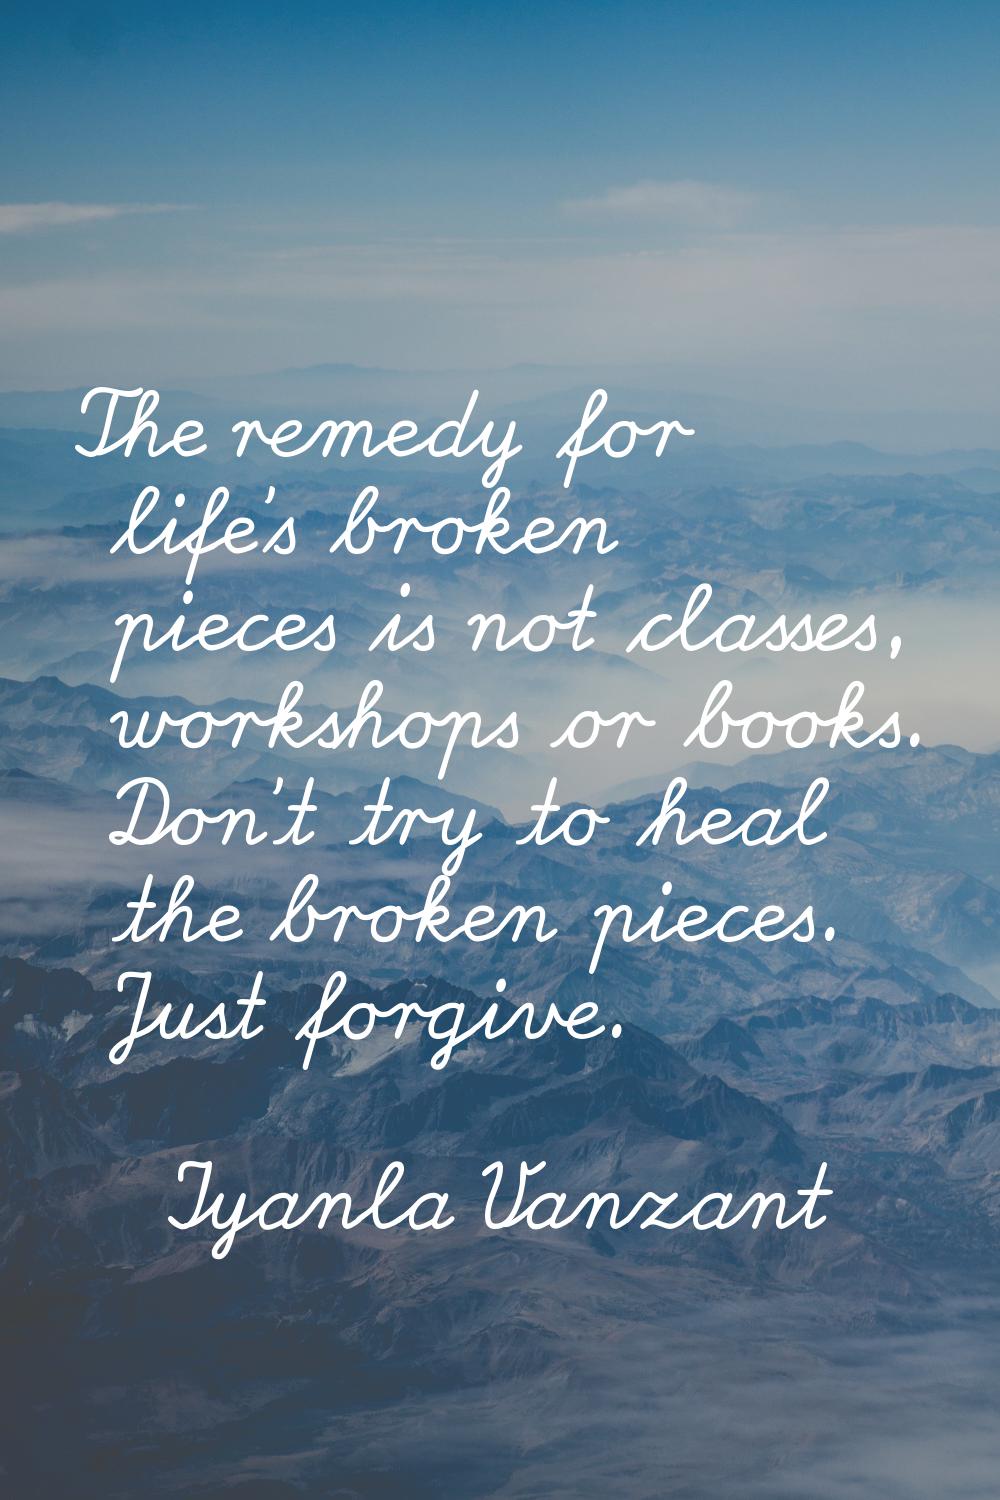 The remedy for life's broken pieces is not classes, workshops or books. Don't try to heal the broke